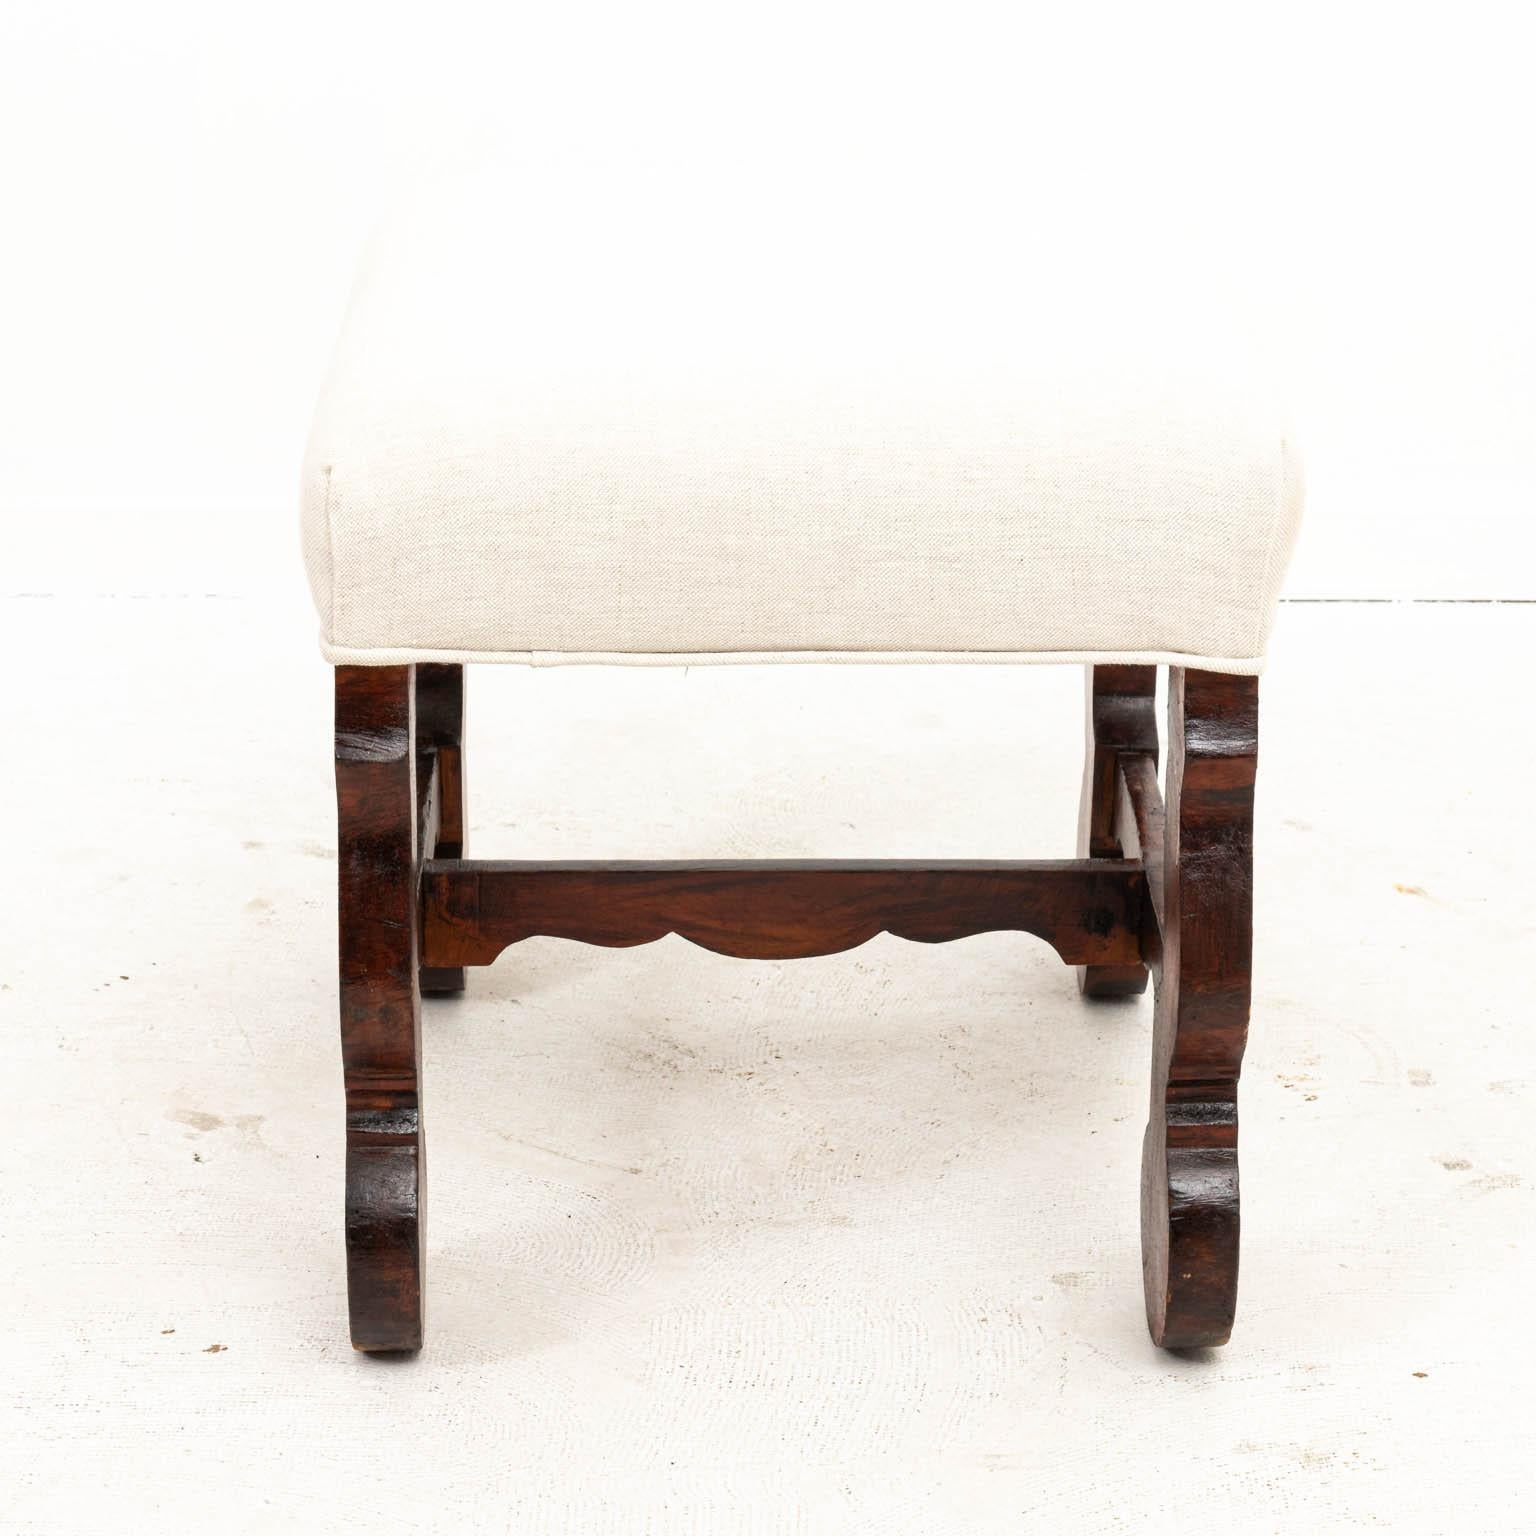 Spanish Baroque bench in walnut with upholstered seat. Made in Spain, circa 1890s. Please note of wear consistent with age including chips and finish loss.